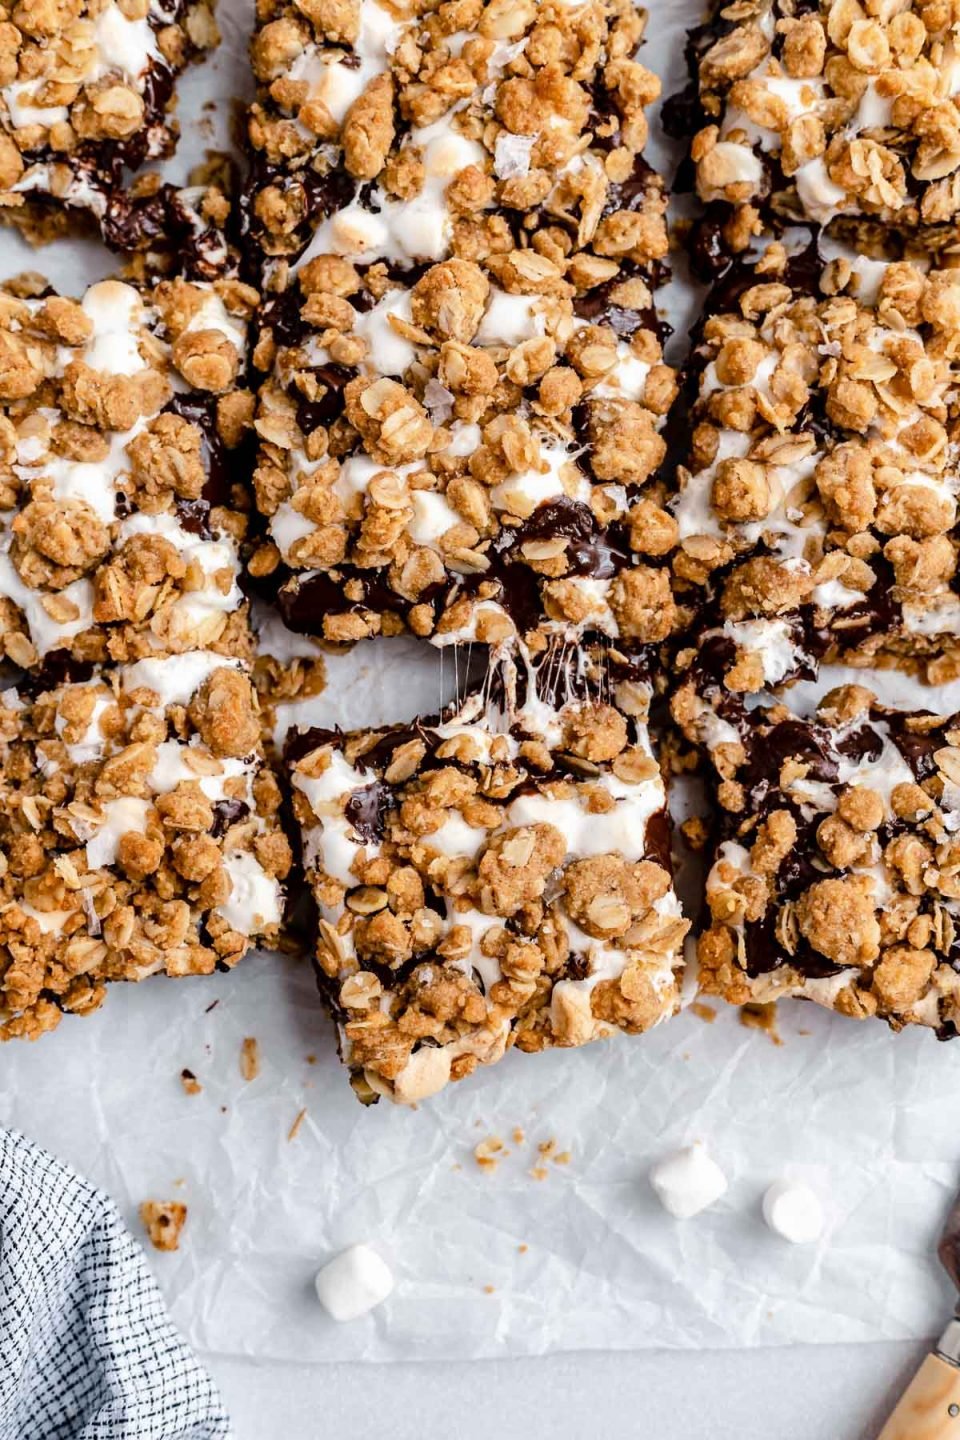 Sliced gooey s'mores crumble bars arranged on a piece of parchment paper atop a white surface. The bars are pulled apart, ever so slightly, with gooey bits of marshmallow strung between the sliced bars.